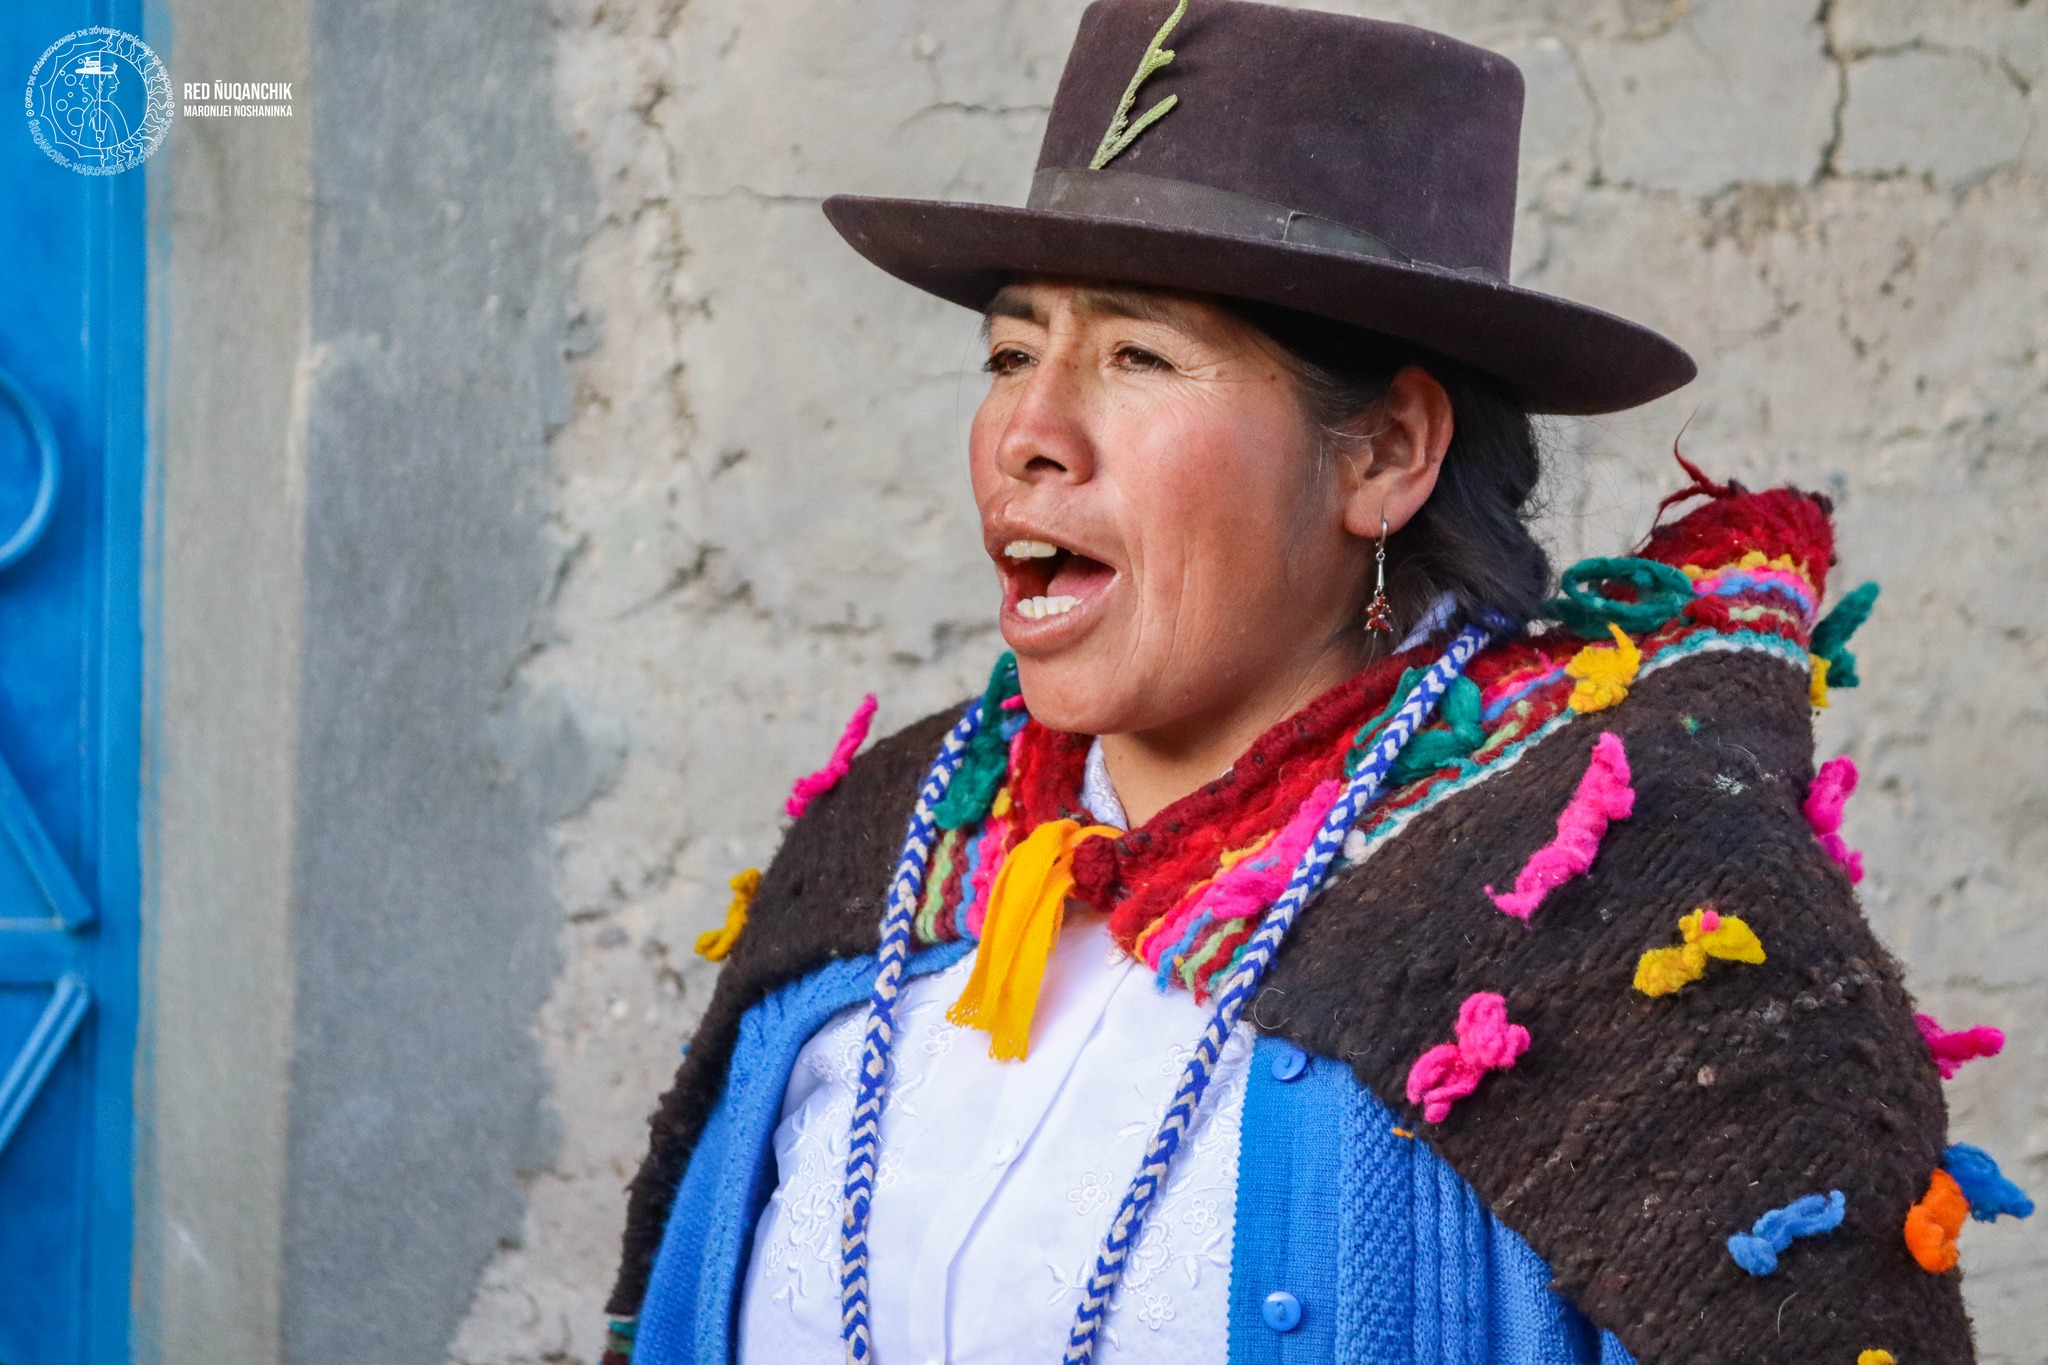 A close up shot of an an Indigenous woman. She is wearing blue cardigan and a multicolored robe on that. She is also wearing a hat and appears to be in the middle of saying something. Picture courtesy of La Red Ñuqanchik Maronijei Noshaninka.